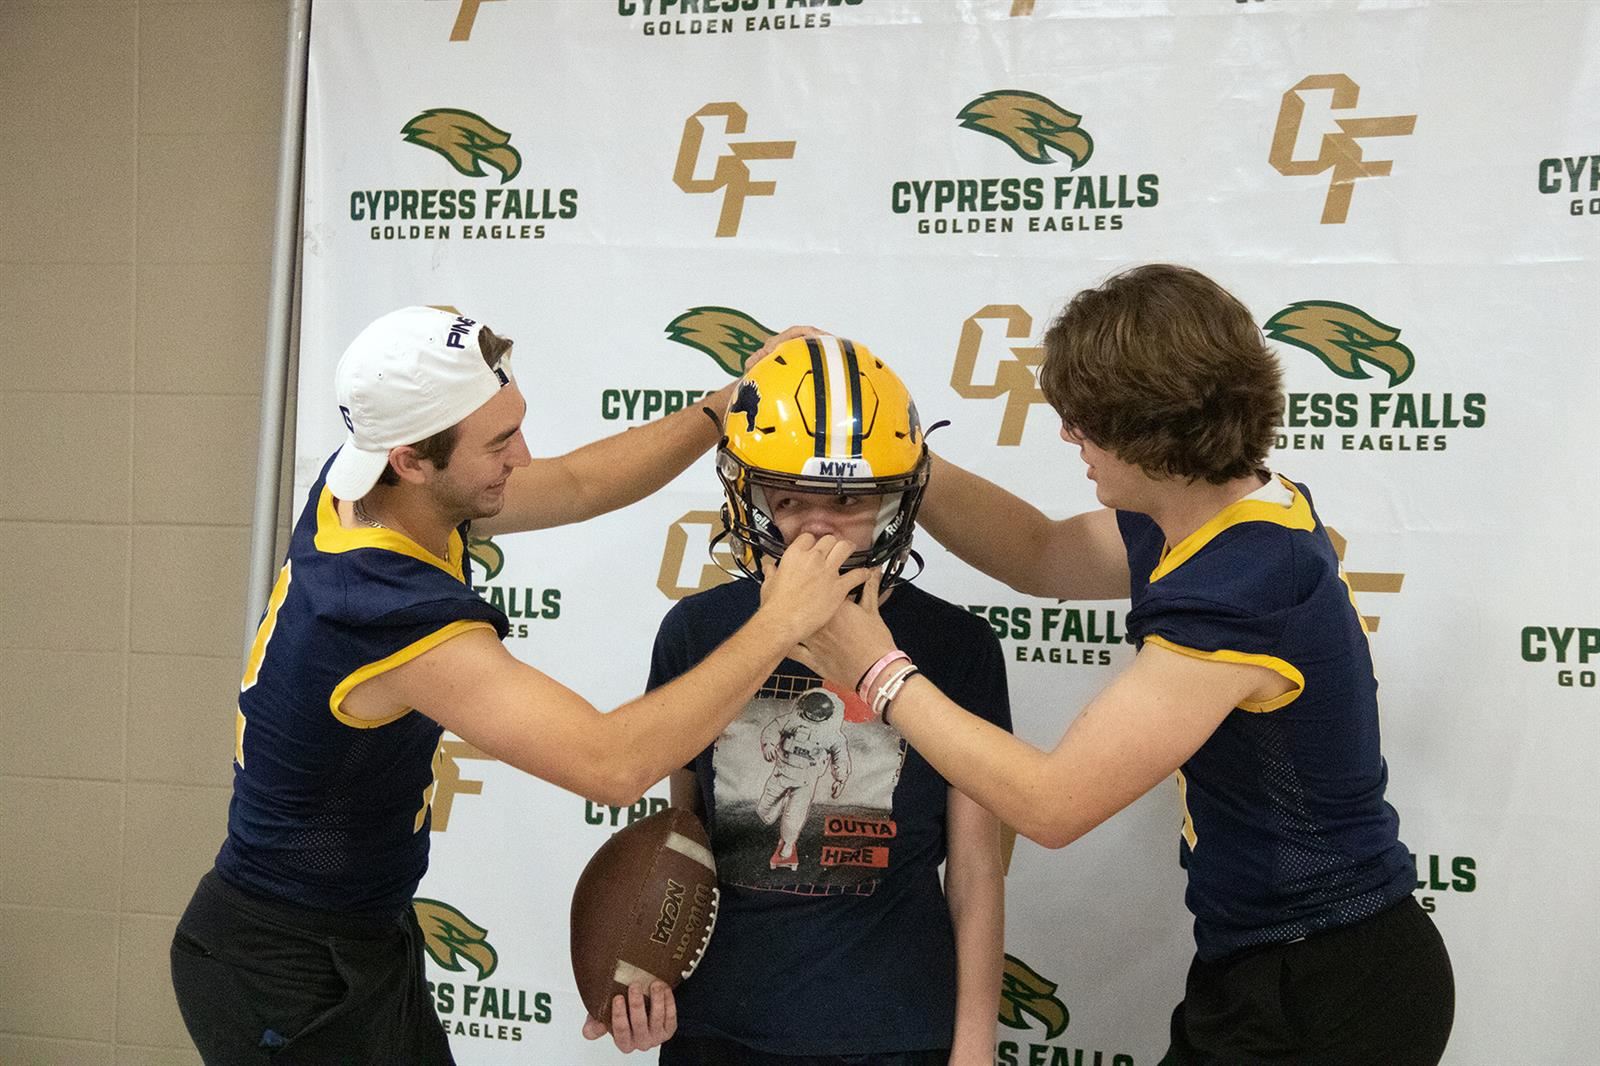 CFISD football players lead districtwide camp for LIFE Skills students.